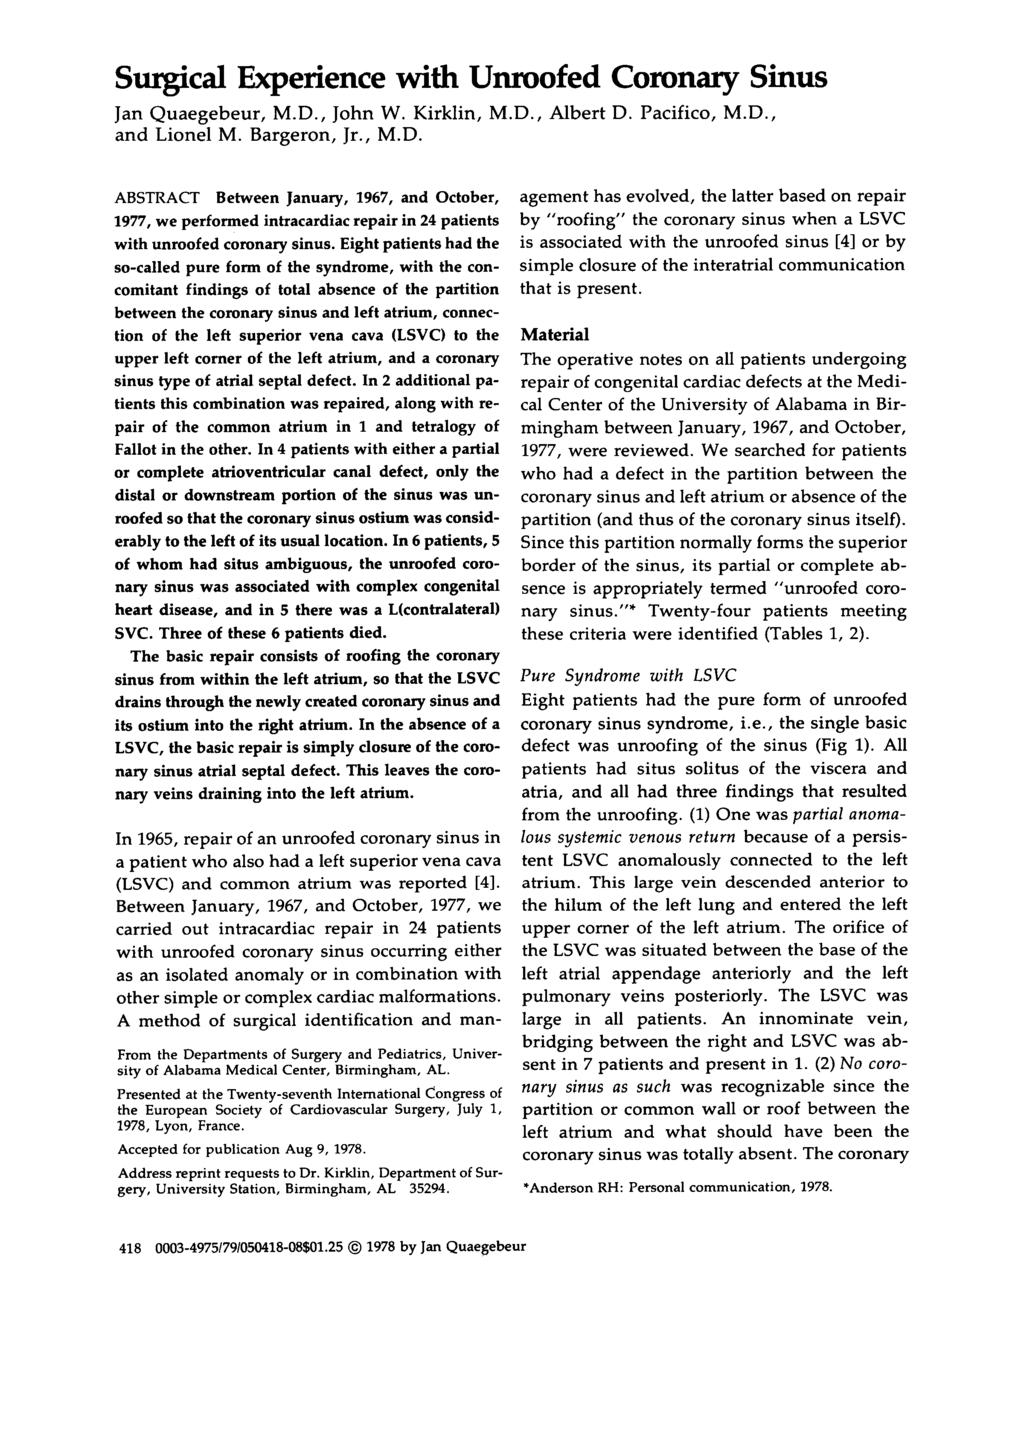 Surgical Experience with Unroofed Coronary Sinus Jan Quaegebeur, M.D., John W. Kirklin, M.D., Albert D. Pacifico, M.D., and Lionel M. Bargeron, Jr., M.D. ABSTRACT Between January, 1967, and October, 1977, we performed intracardiac repair in 24 patients with unroofed coronary sinus.